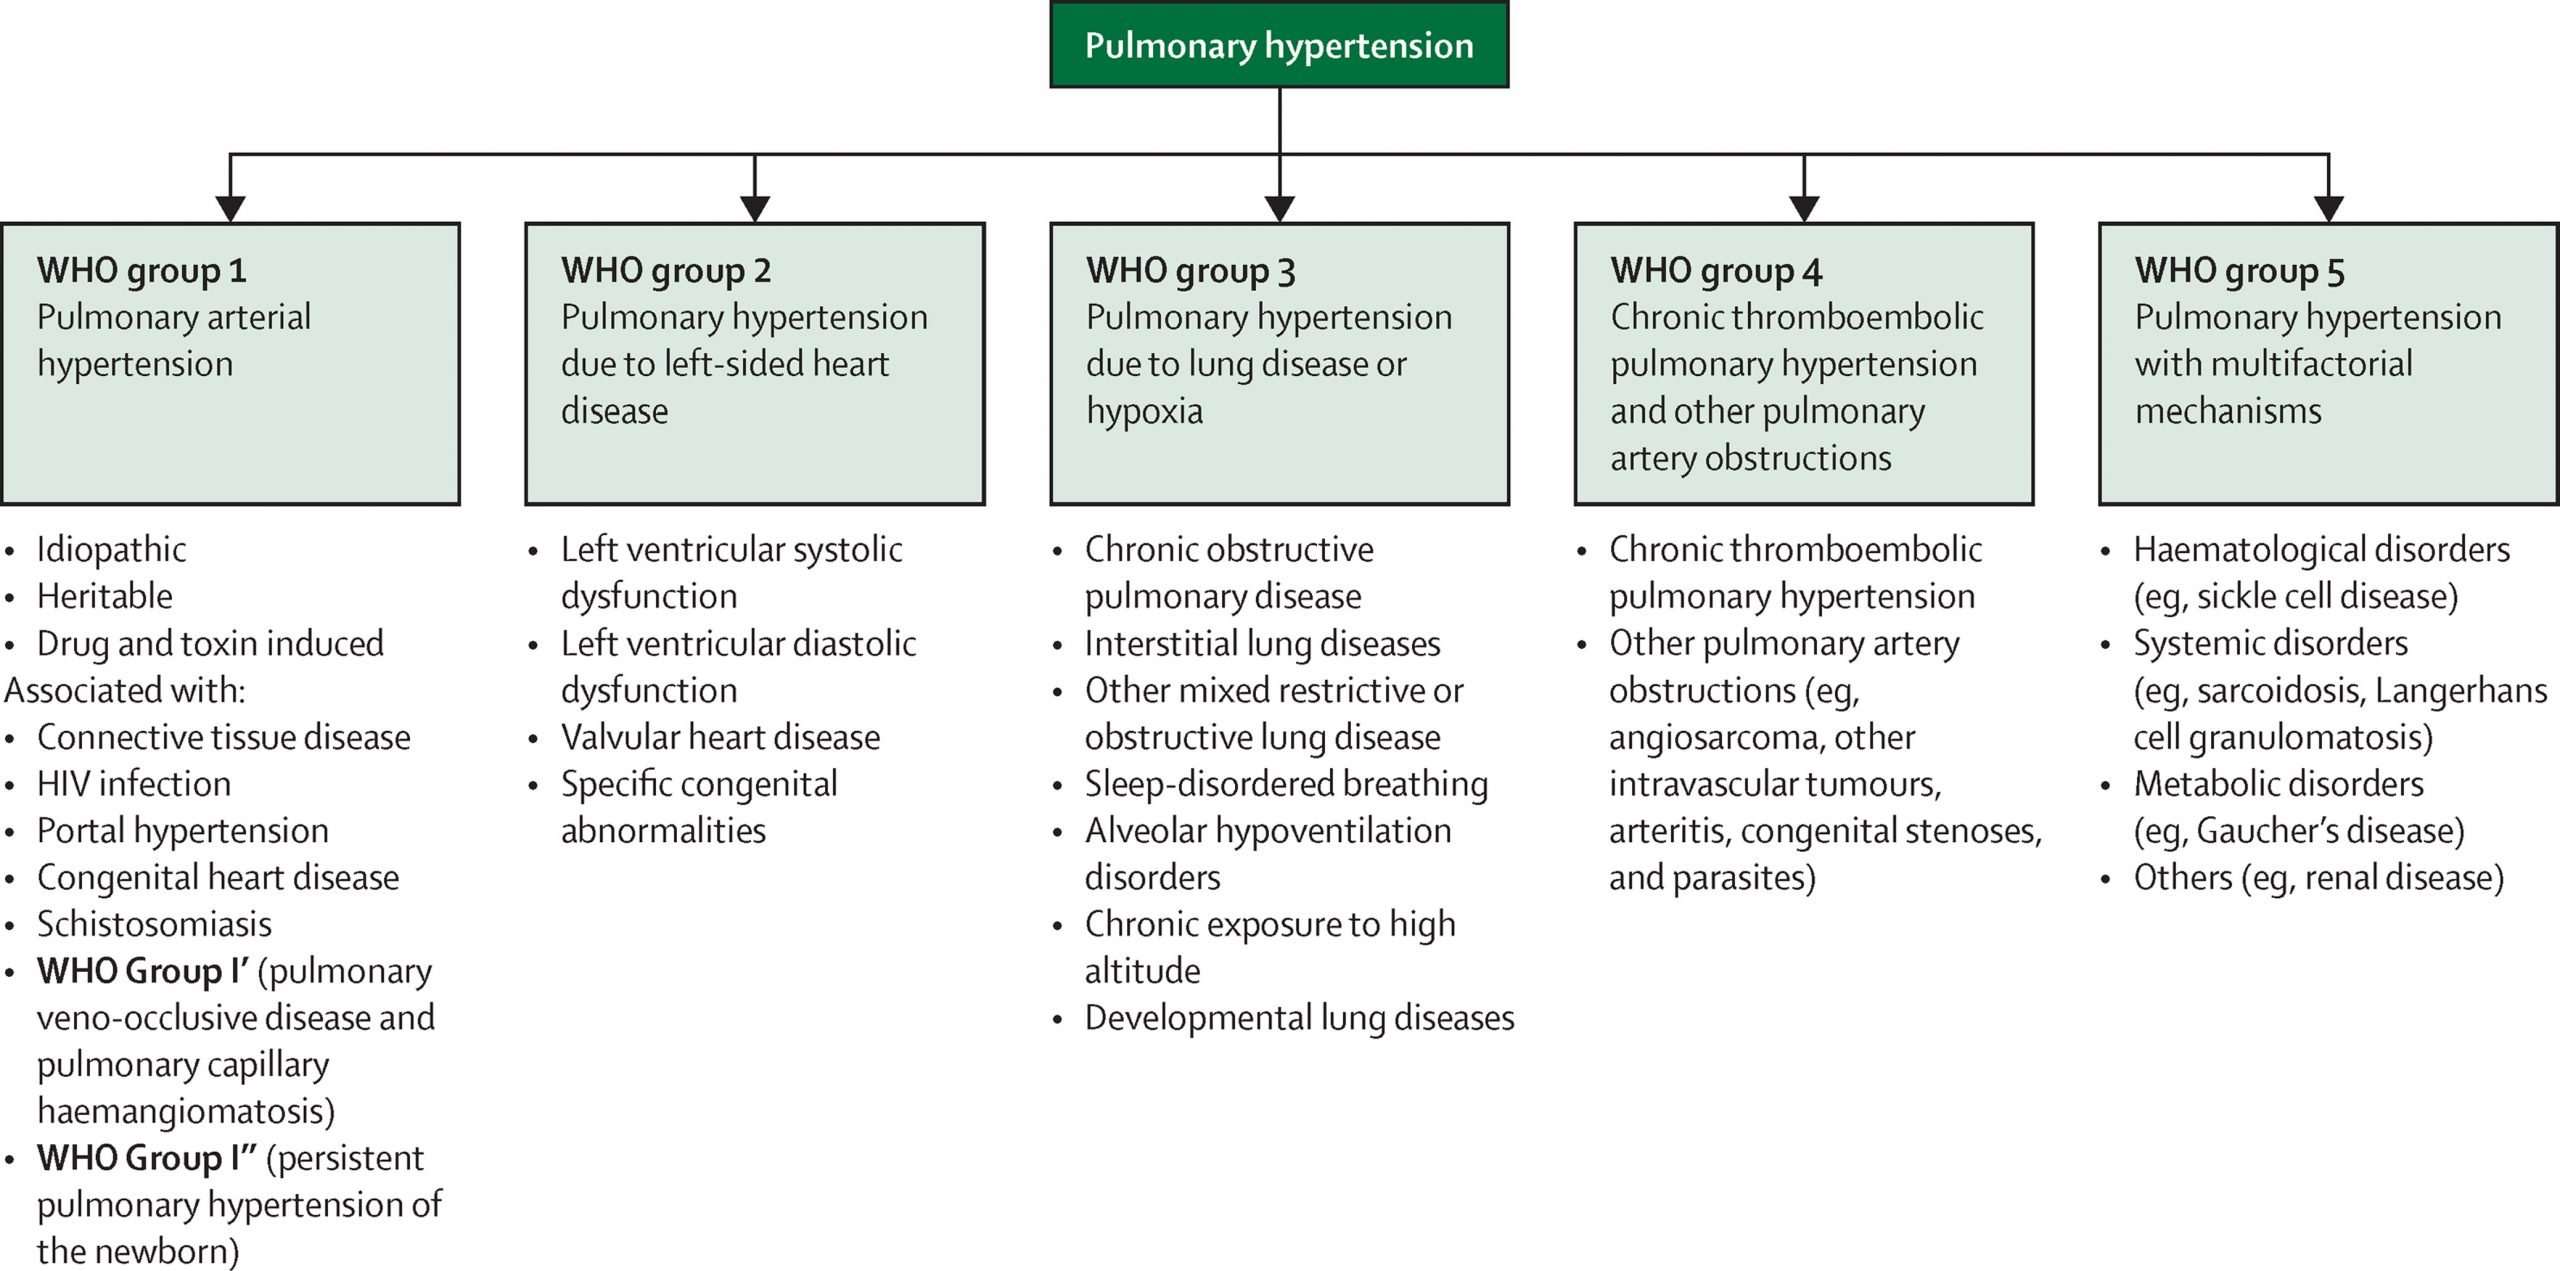 A global view of pulmonary hypertension